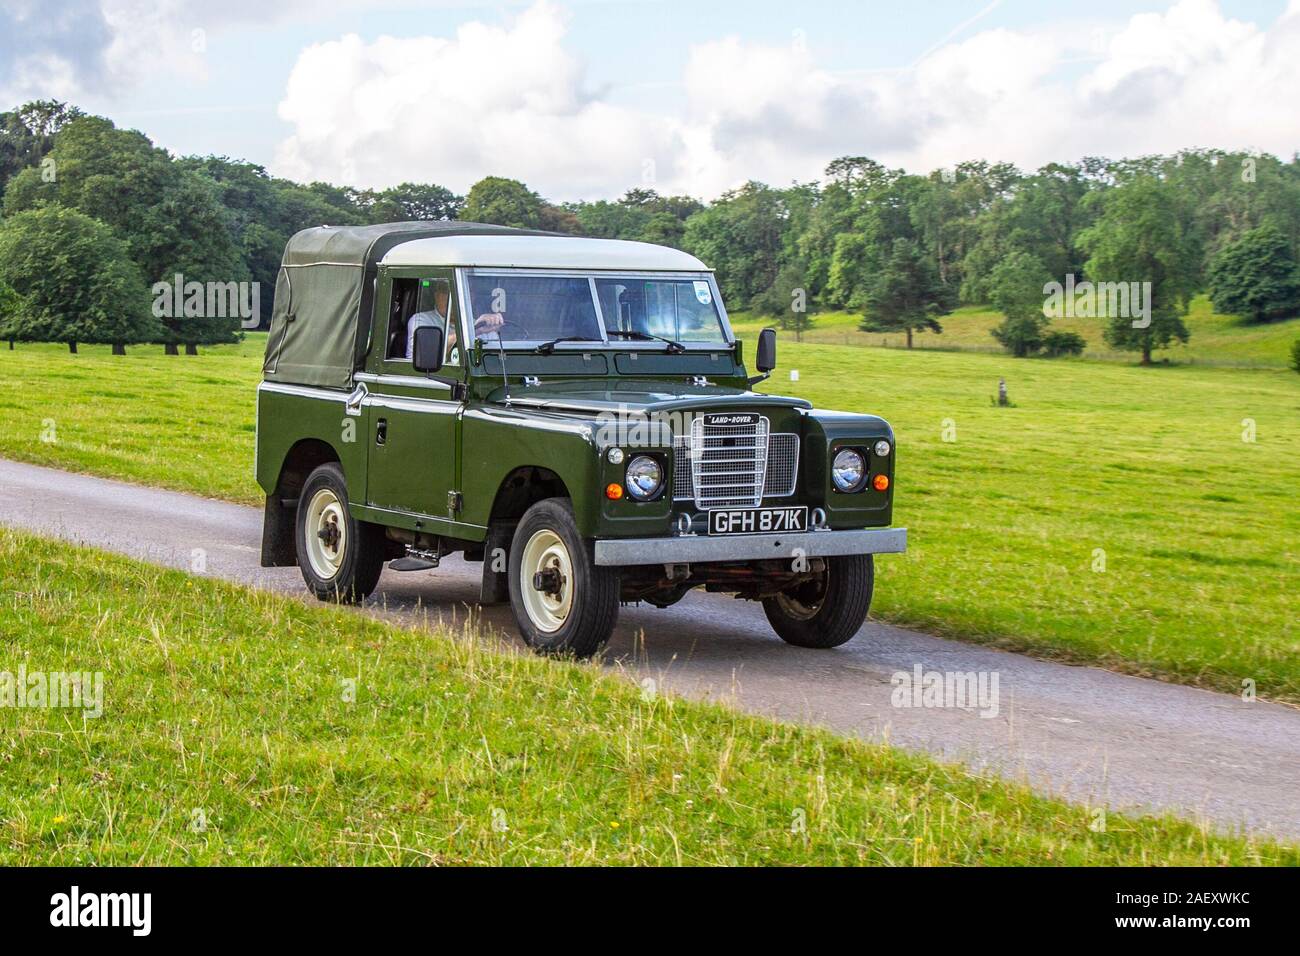 GFH 871K 1970 green Land Rover 90 Series ; Classic cars, historics, cherished, old timers, collectable restored vintage veteran, vehicles of yesteryear arriving for the Mark Woodward historical motoring event at Leighton Hall, Carnforth, UK Stock Photo